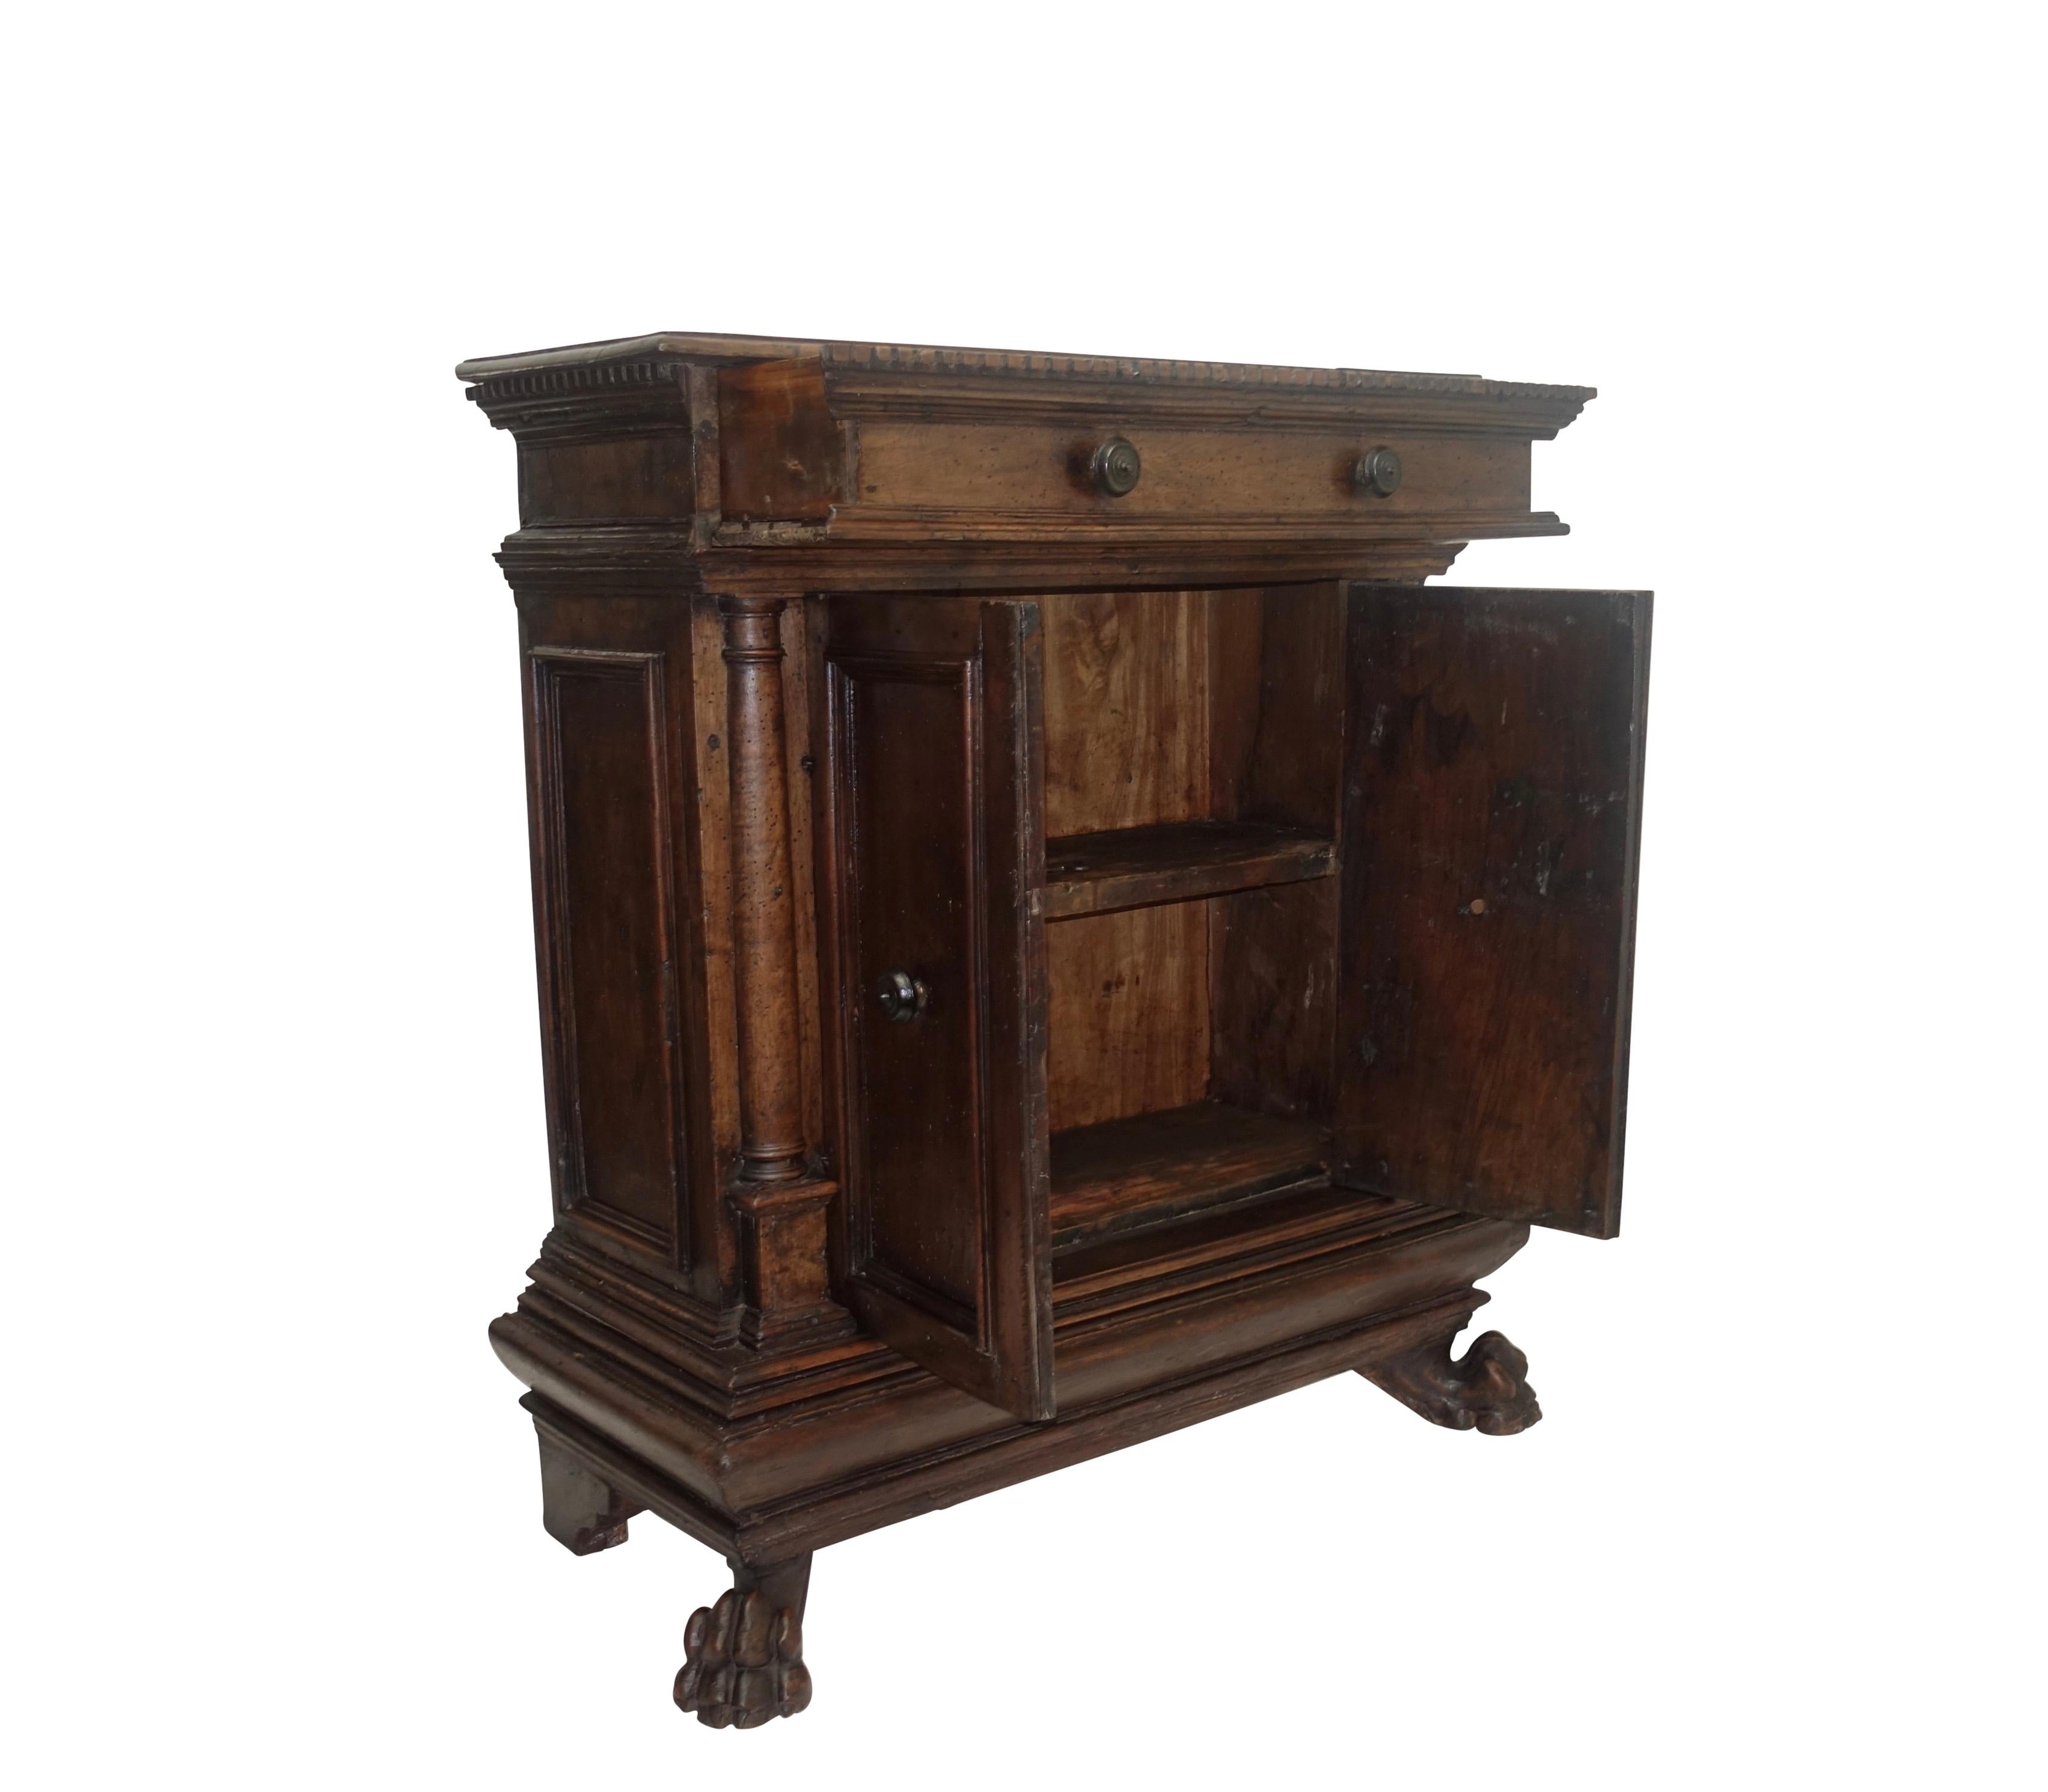  GENUINE Renaissance Walnut Cabinet Buffet, Italian, Early 17TH Century In Good Condition For Sale In San Francisco, CA